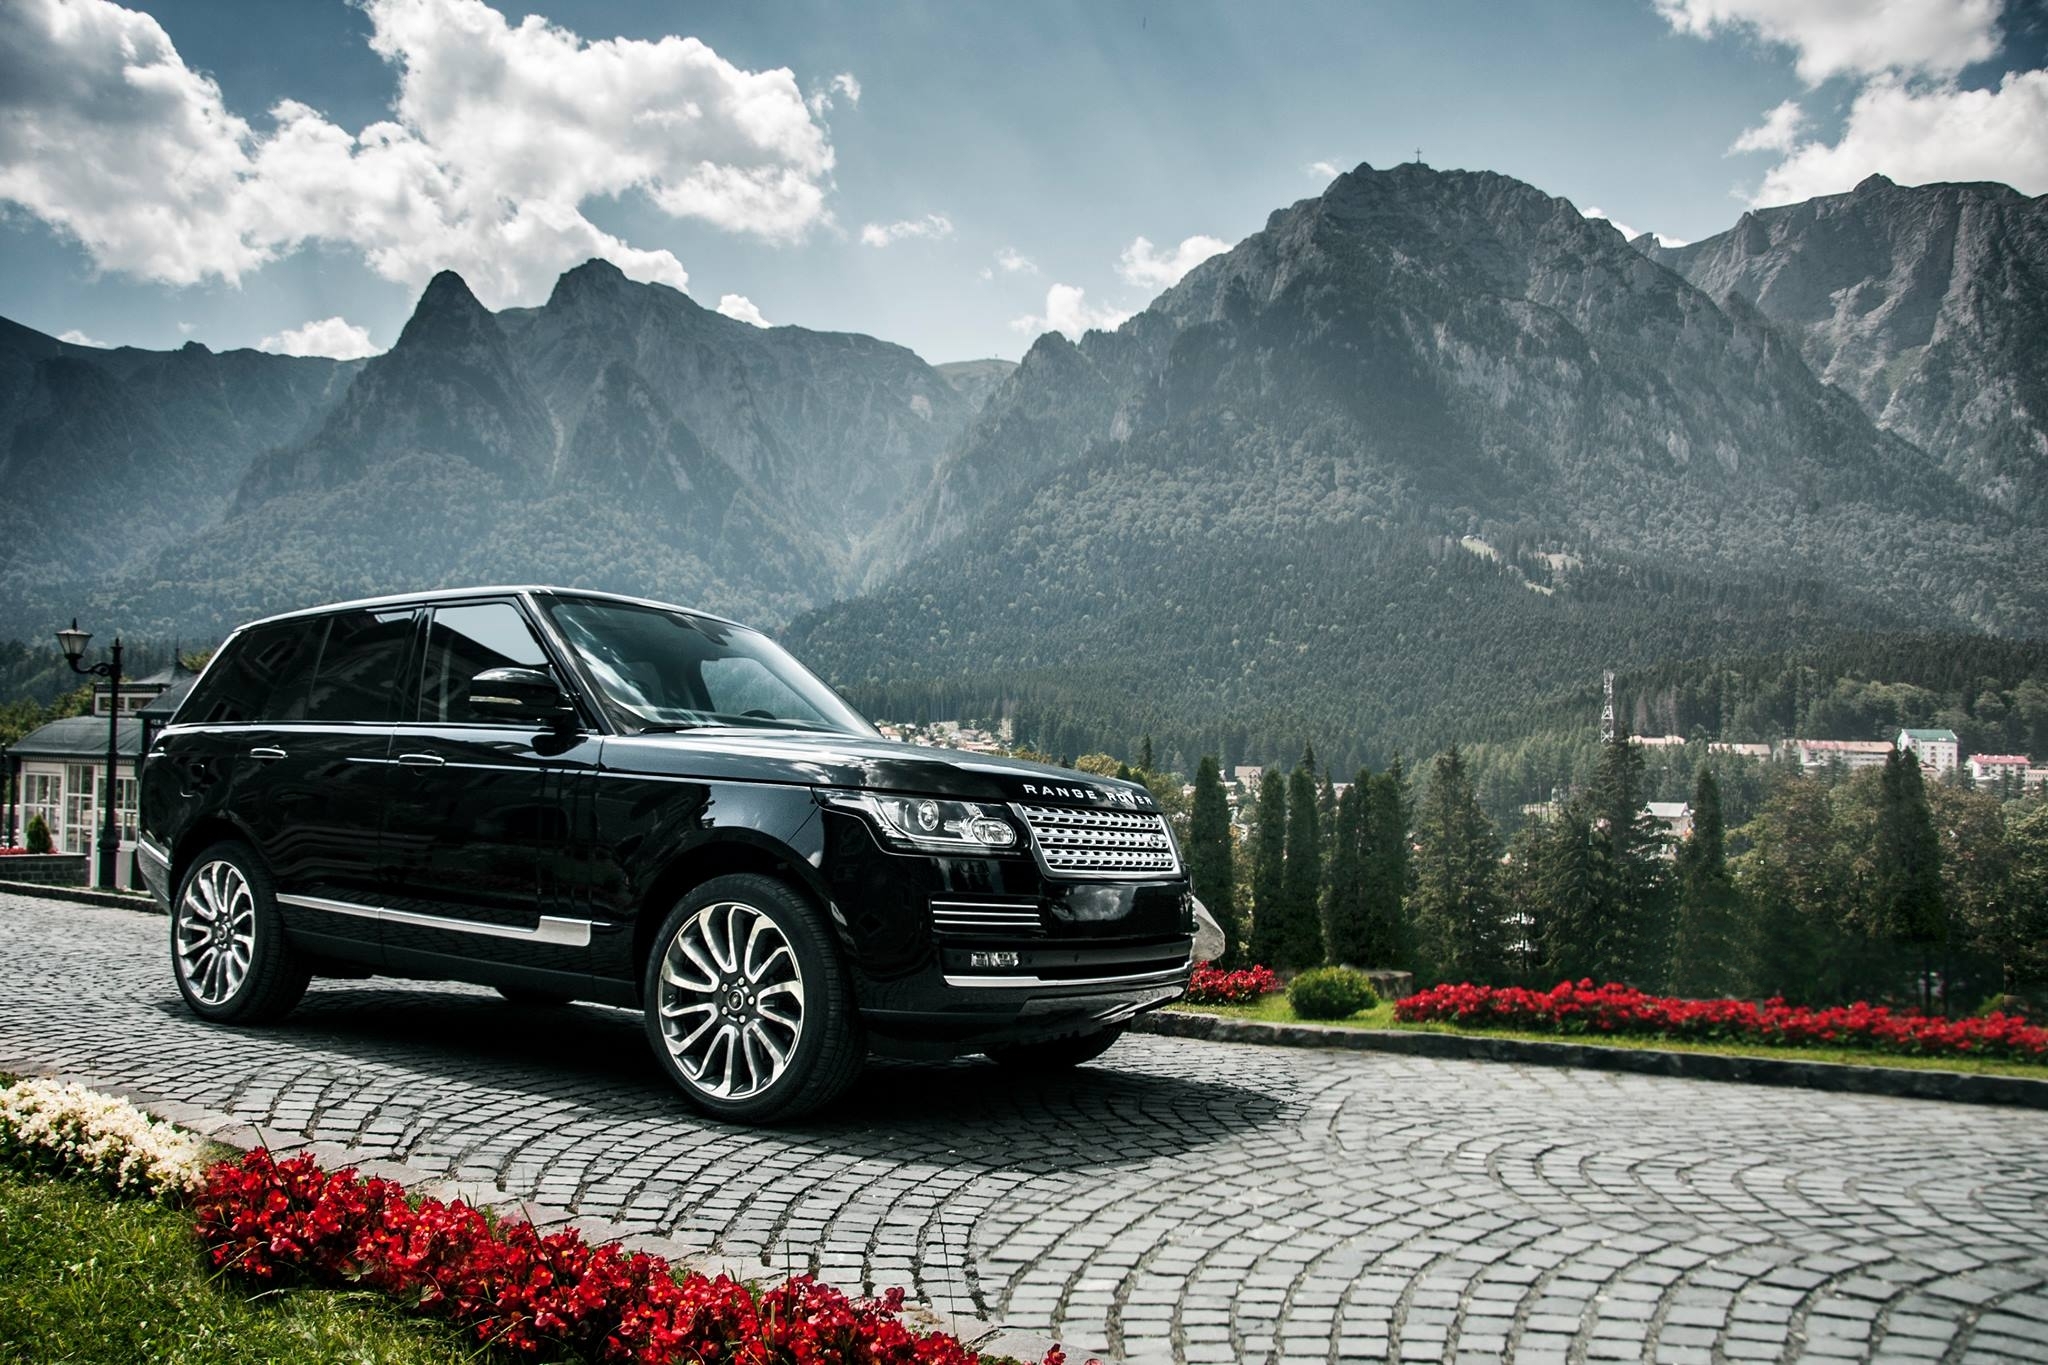 range rover, cars, mountains, black, side view